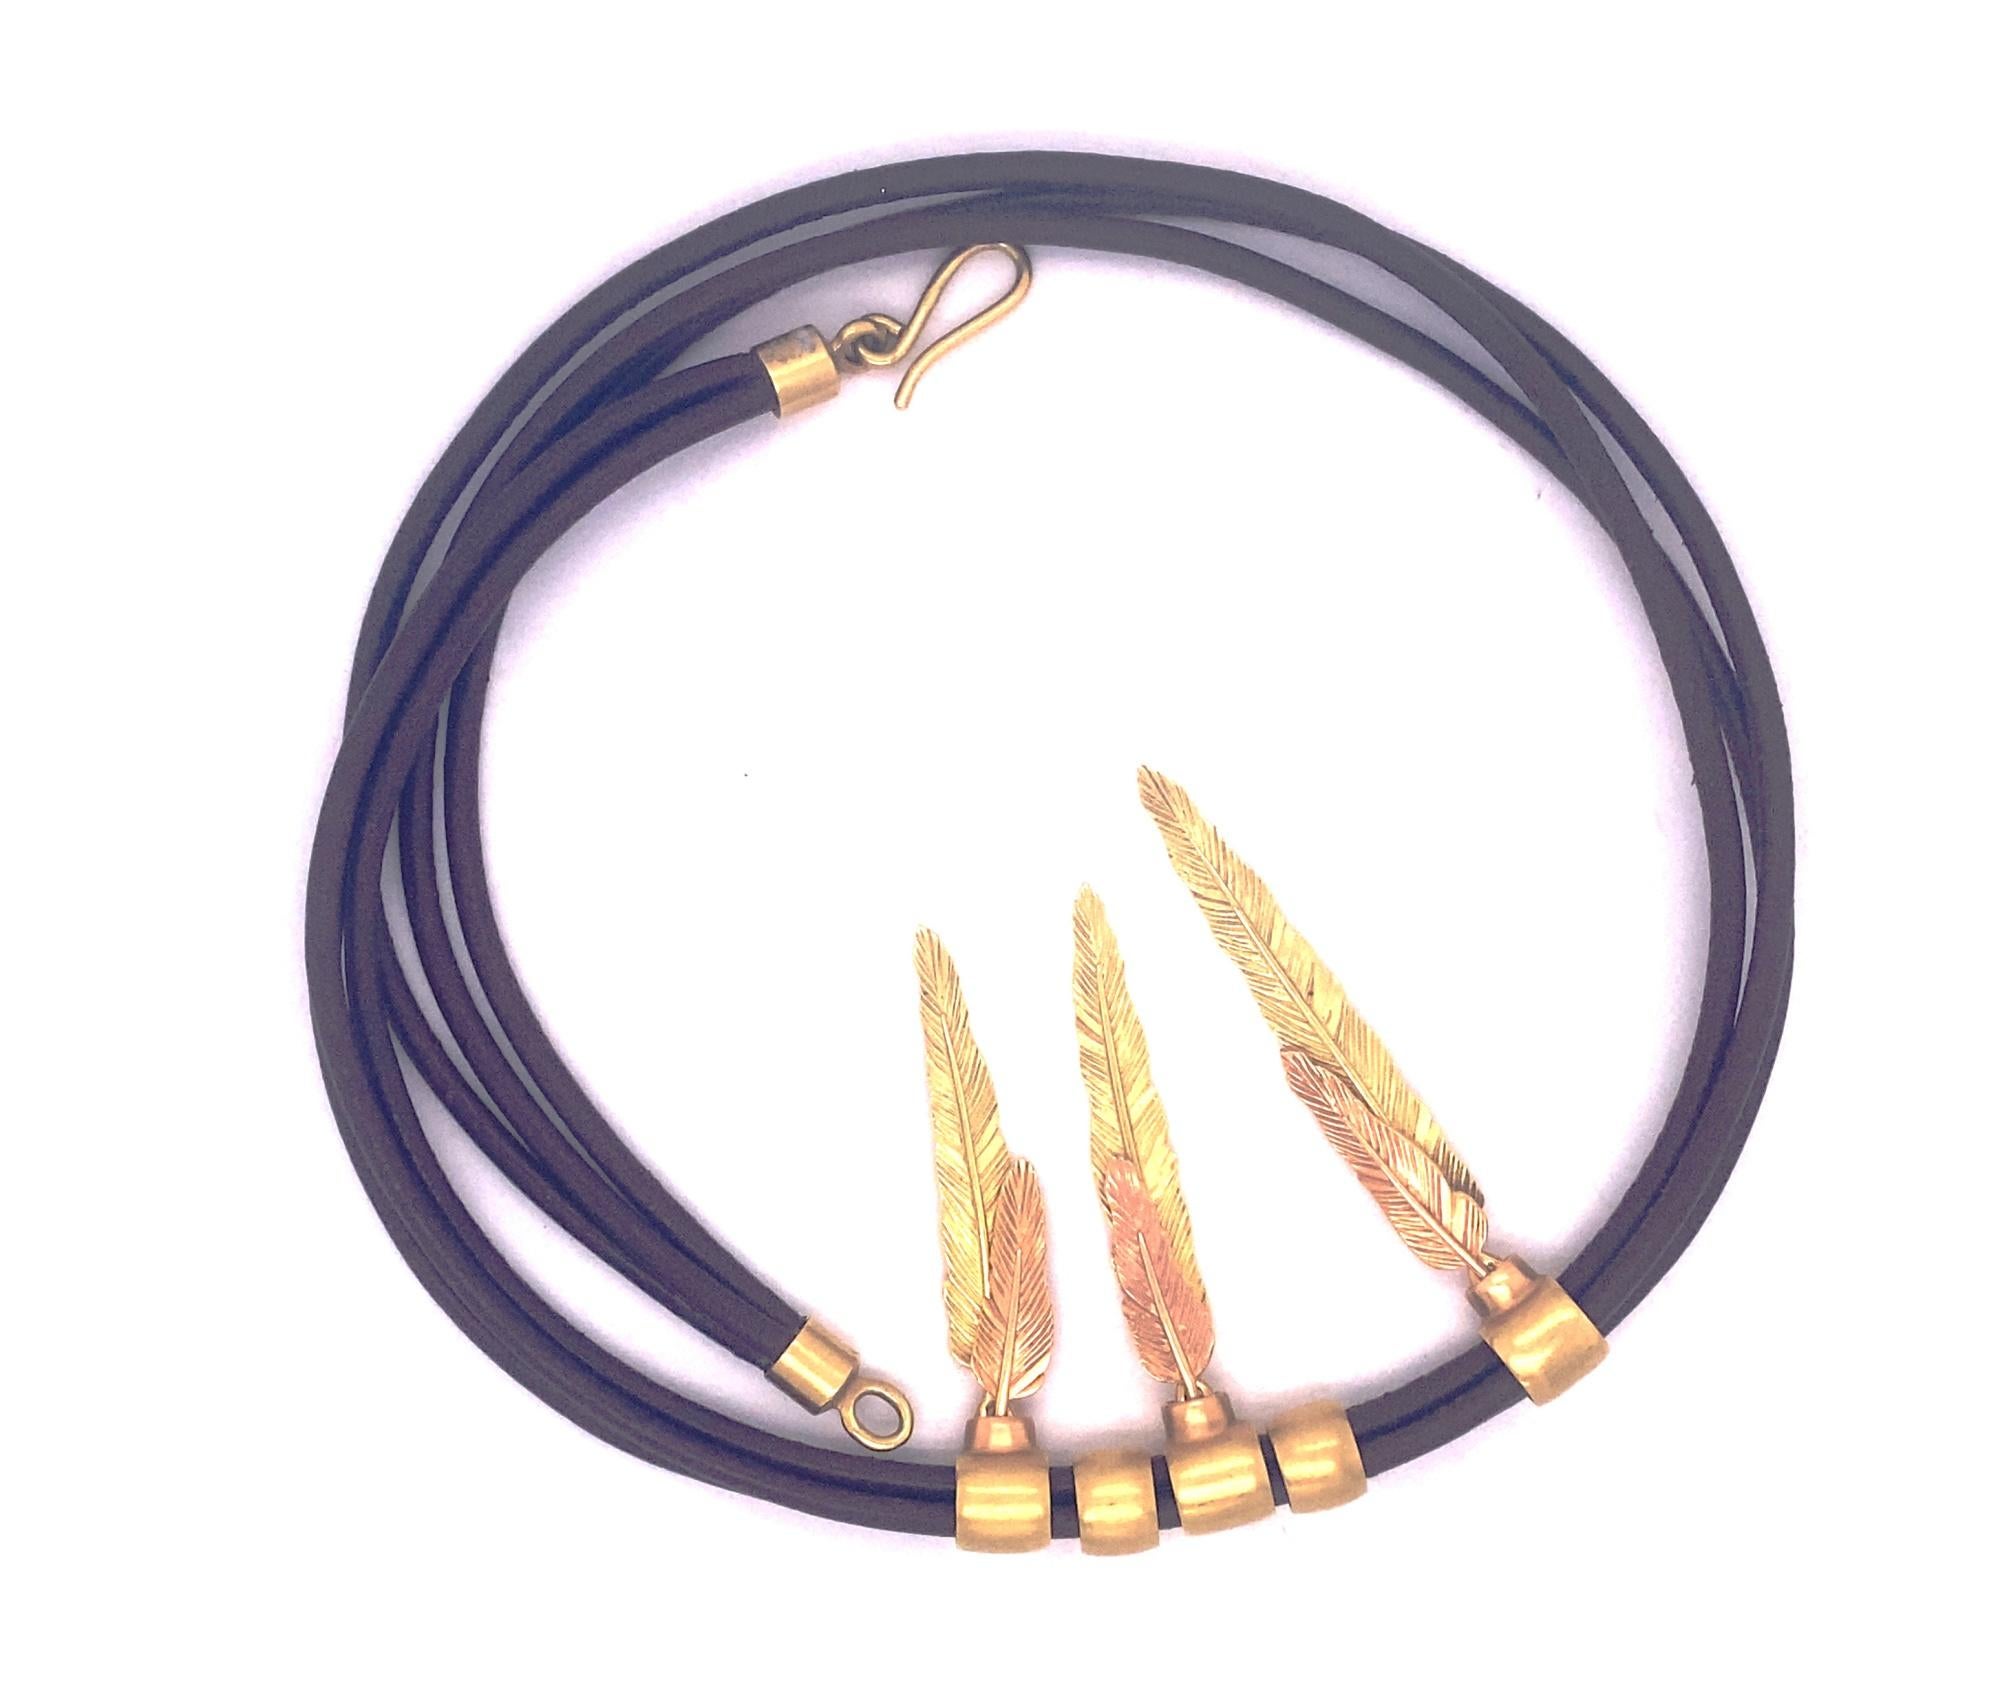 This is a stunning necklace by H. Stern from the Purangow collection inspired by Amazon tribes.  The necklace has a design with two color gold feathers layered on top of each with attached to a three strand leather necklace with gold clasp. Signed